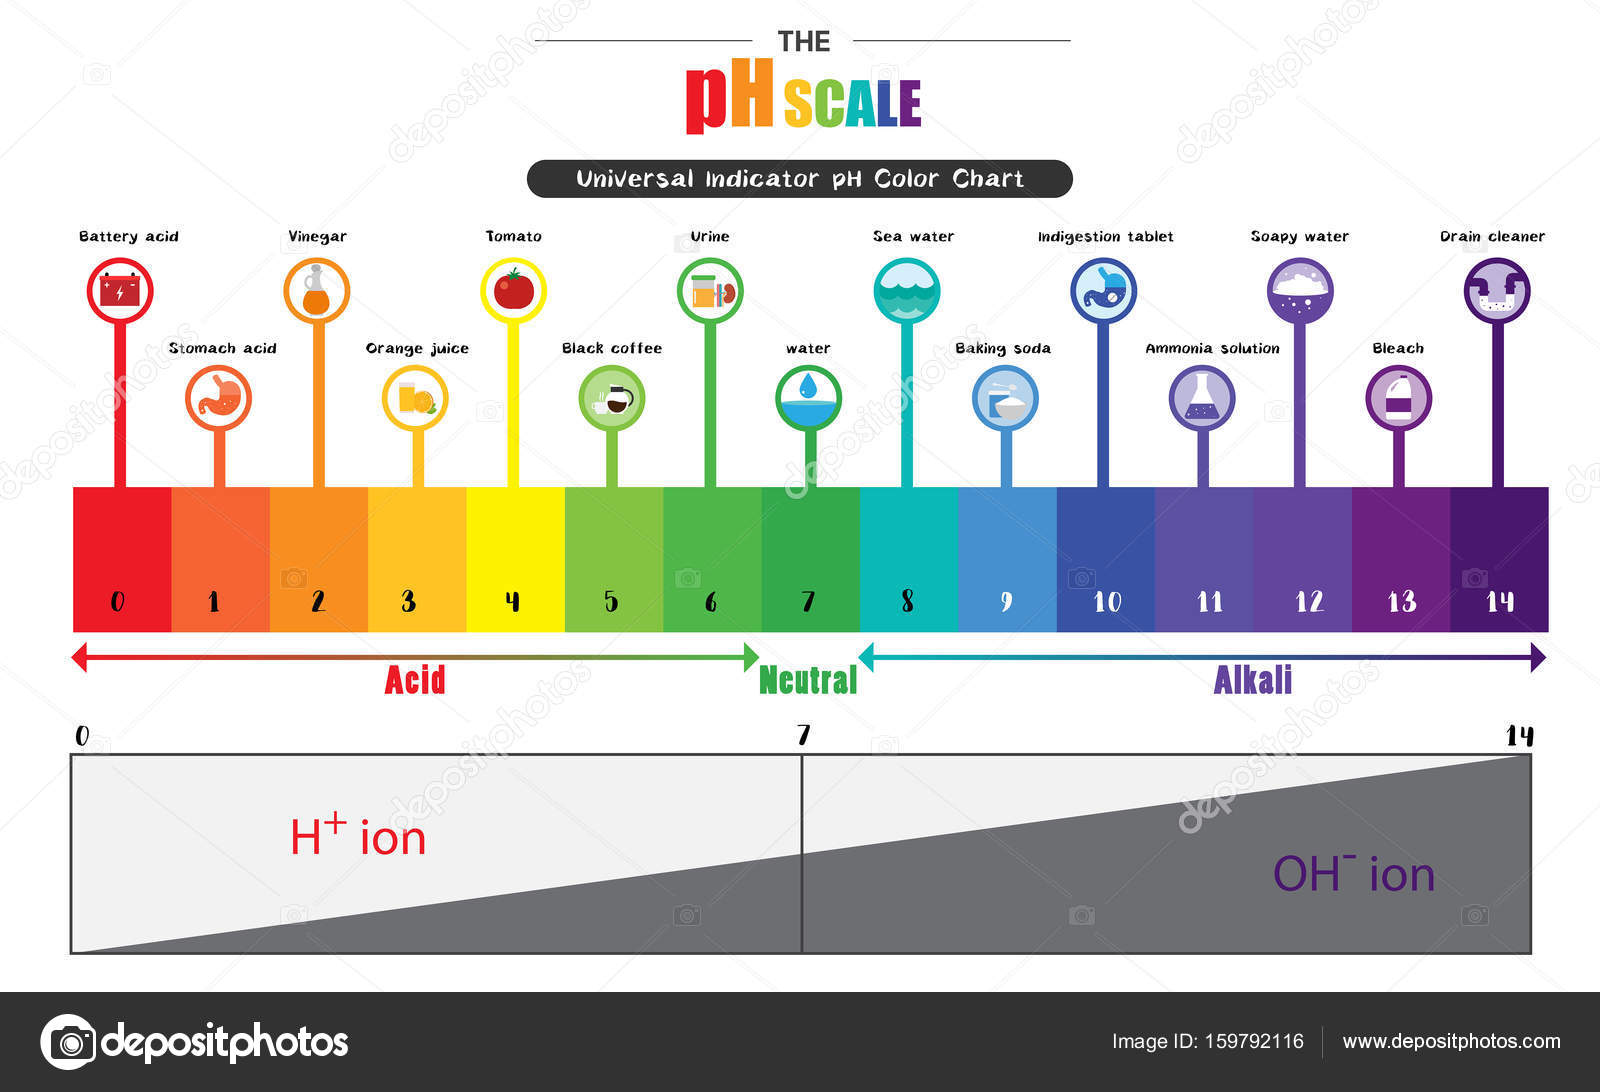 the-ph-scale-universal-indicator-ph-color-chart-diagram-stock-vector